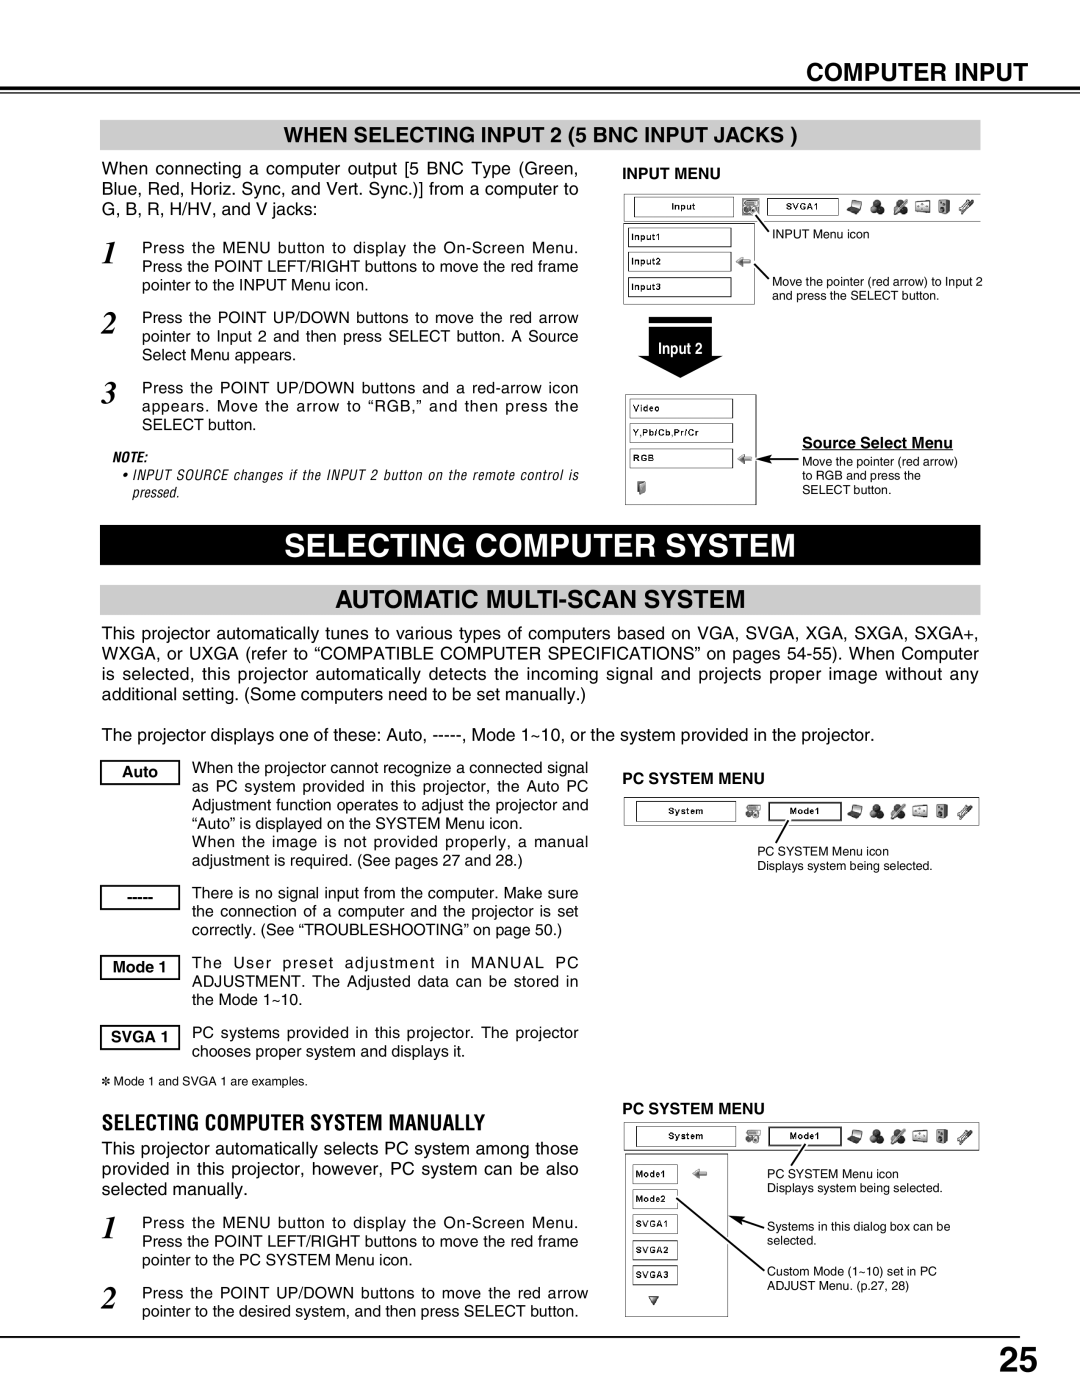 Eiki LC-X71L owner manual WHEN SELECTING INPUT 2 5 BNC INPUT JACKS, Selecting Computer System Manually 